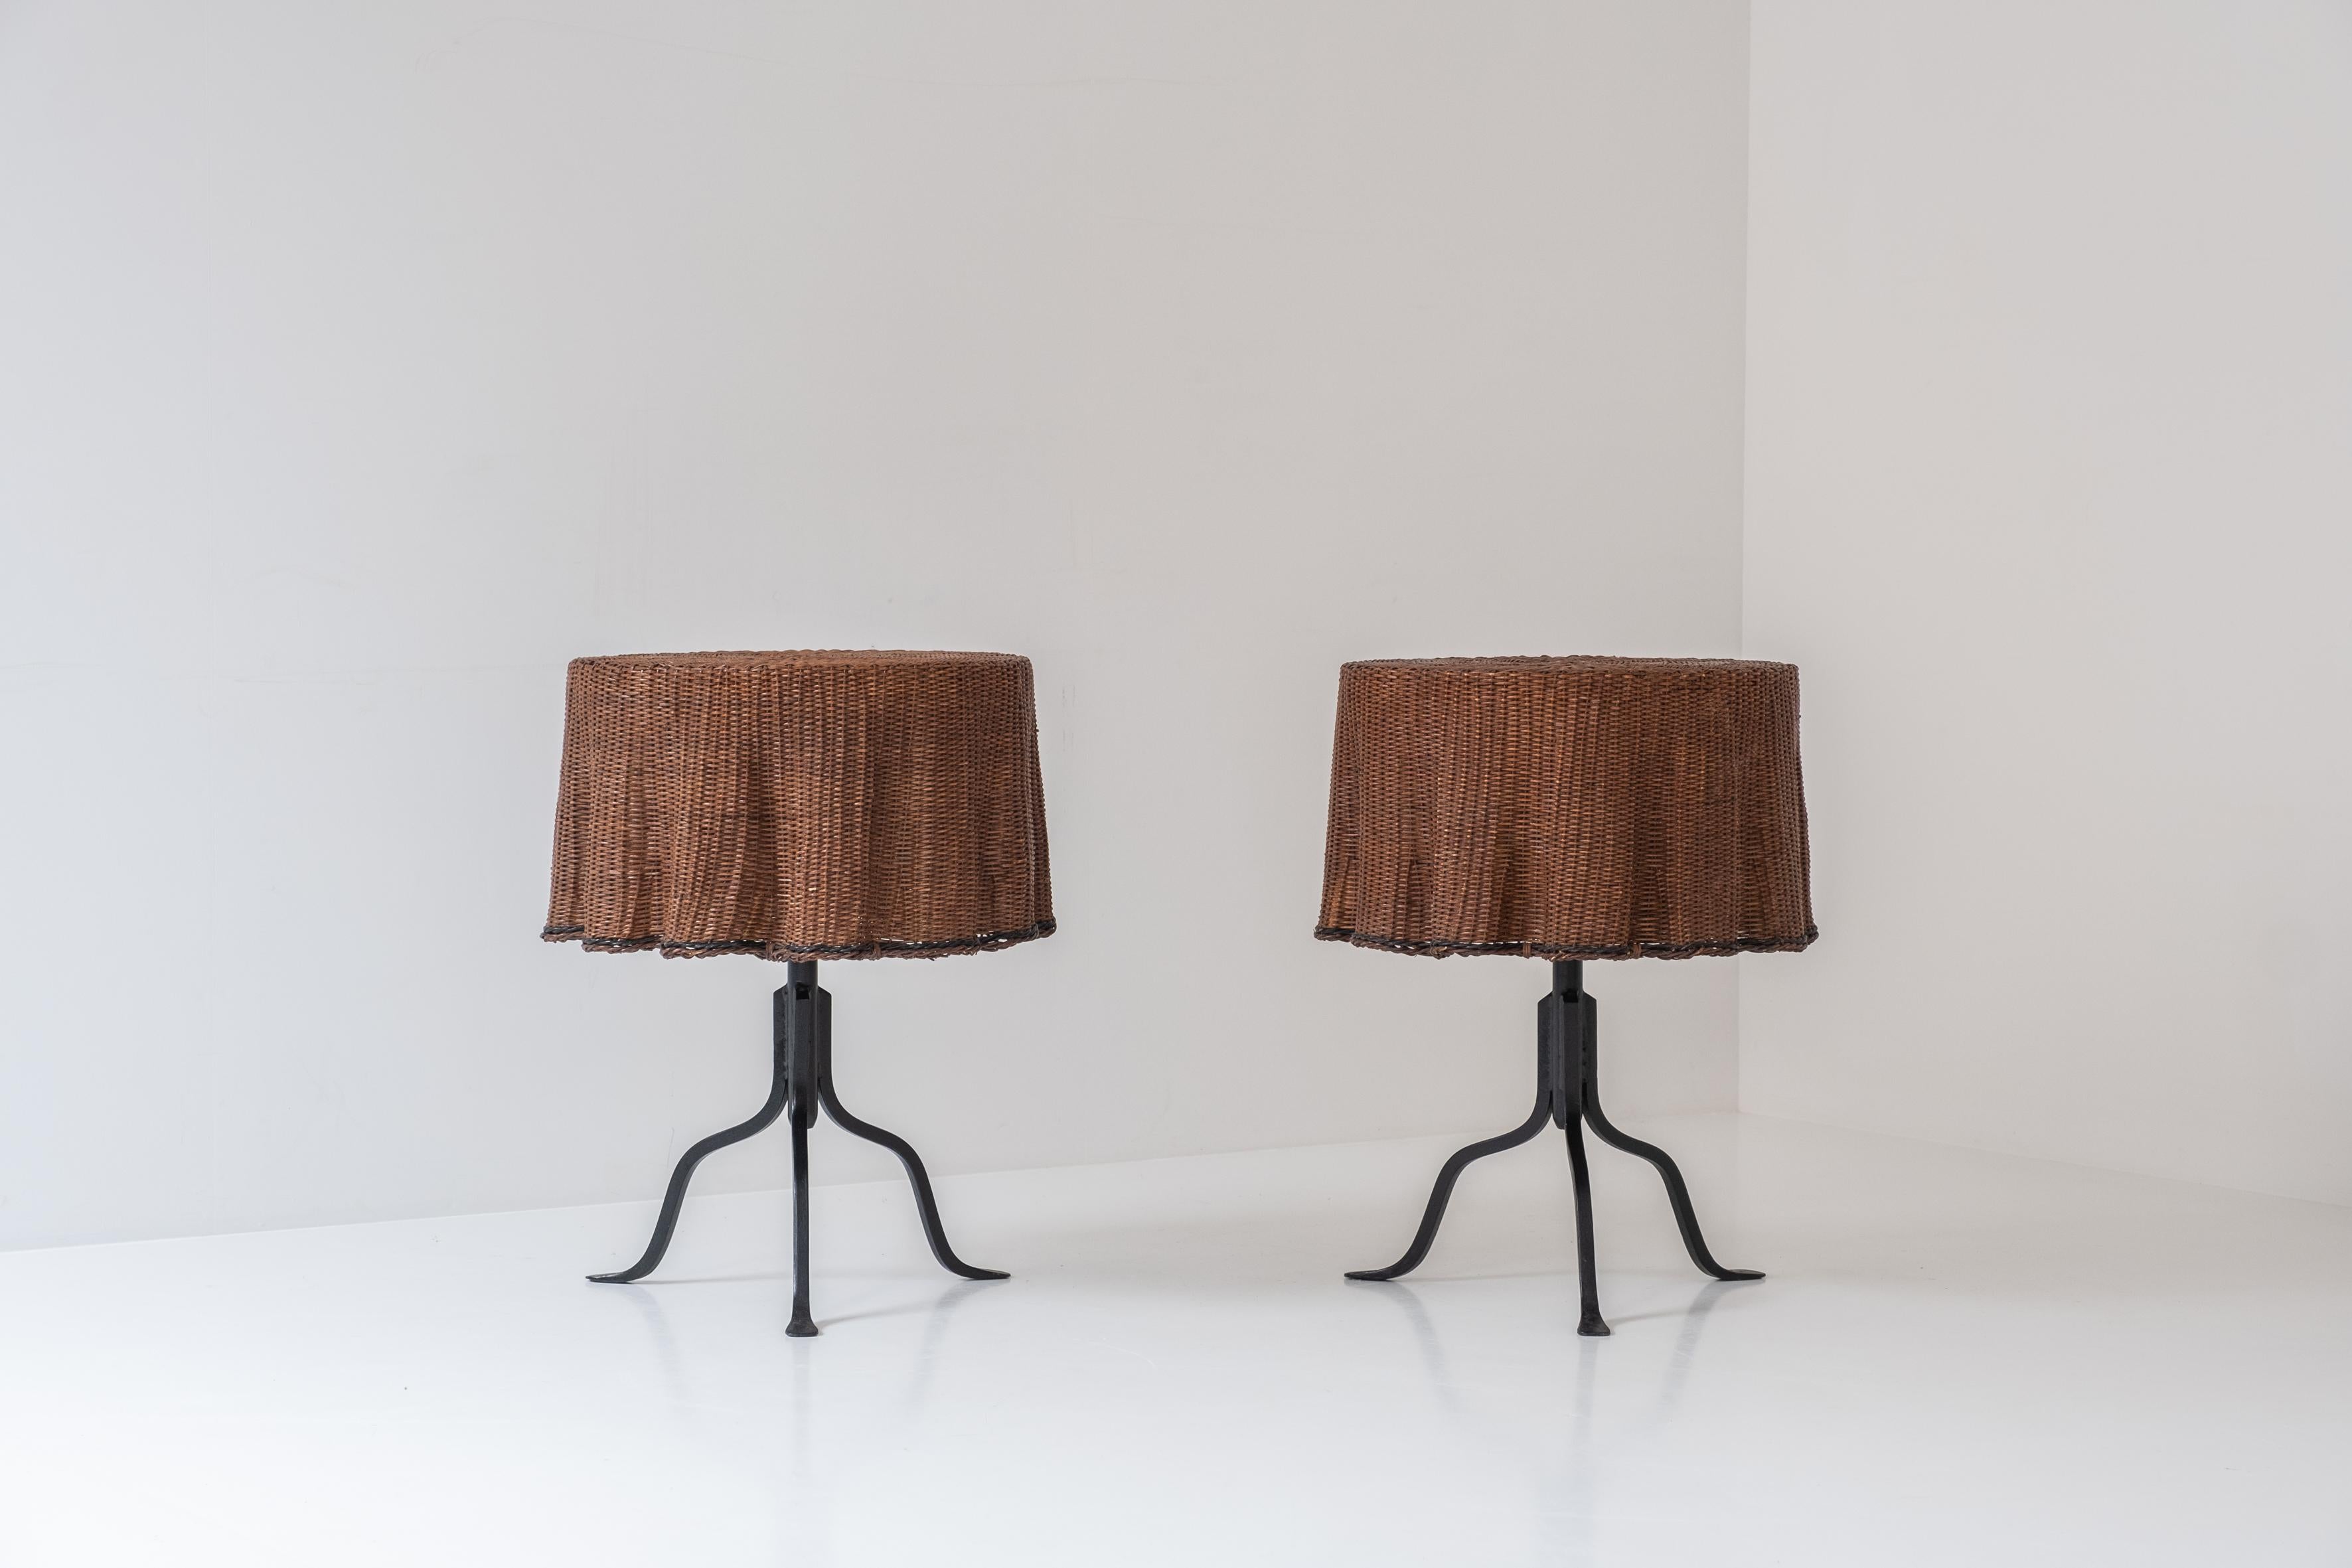 Rare set of 2 ‘Trompe L’Oeil’ wicker side tables with ‘draped’ illusion from France, designed and manufactured during the 1970’s. This table features a black lacquered iron base and rattan wickerwork. Both presented in its original and very good